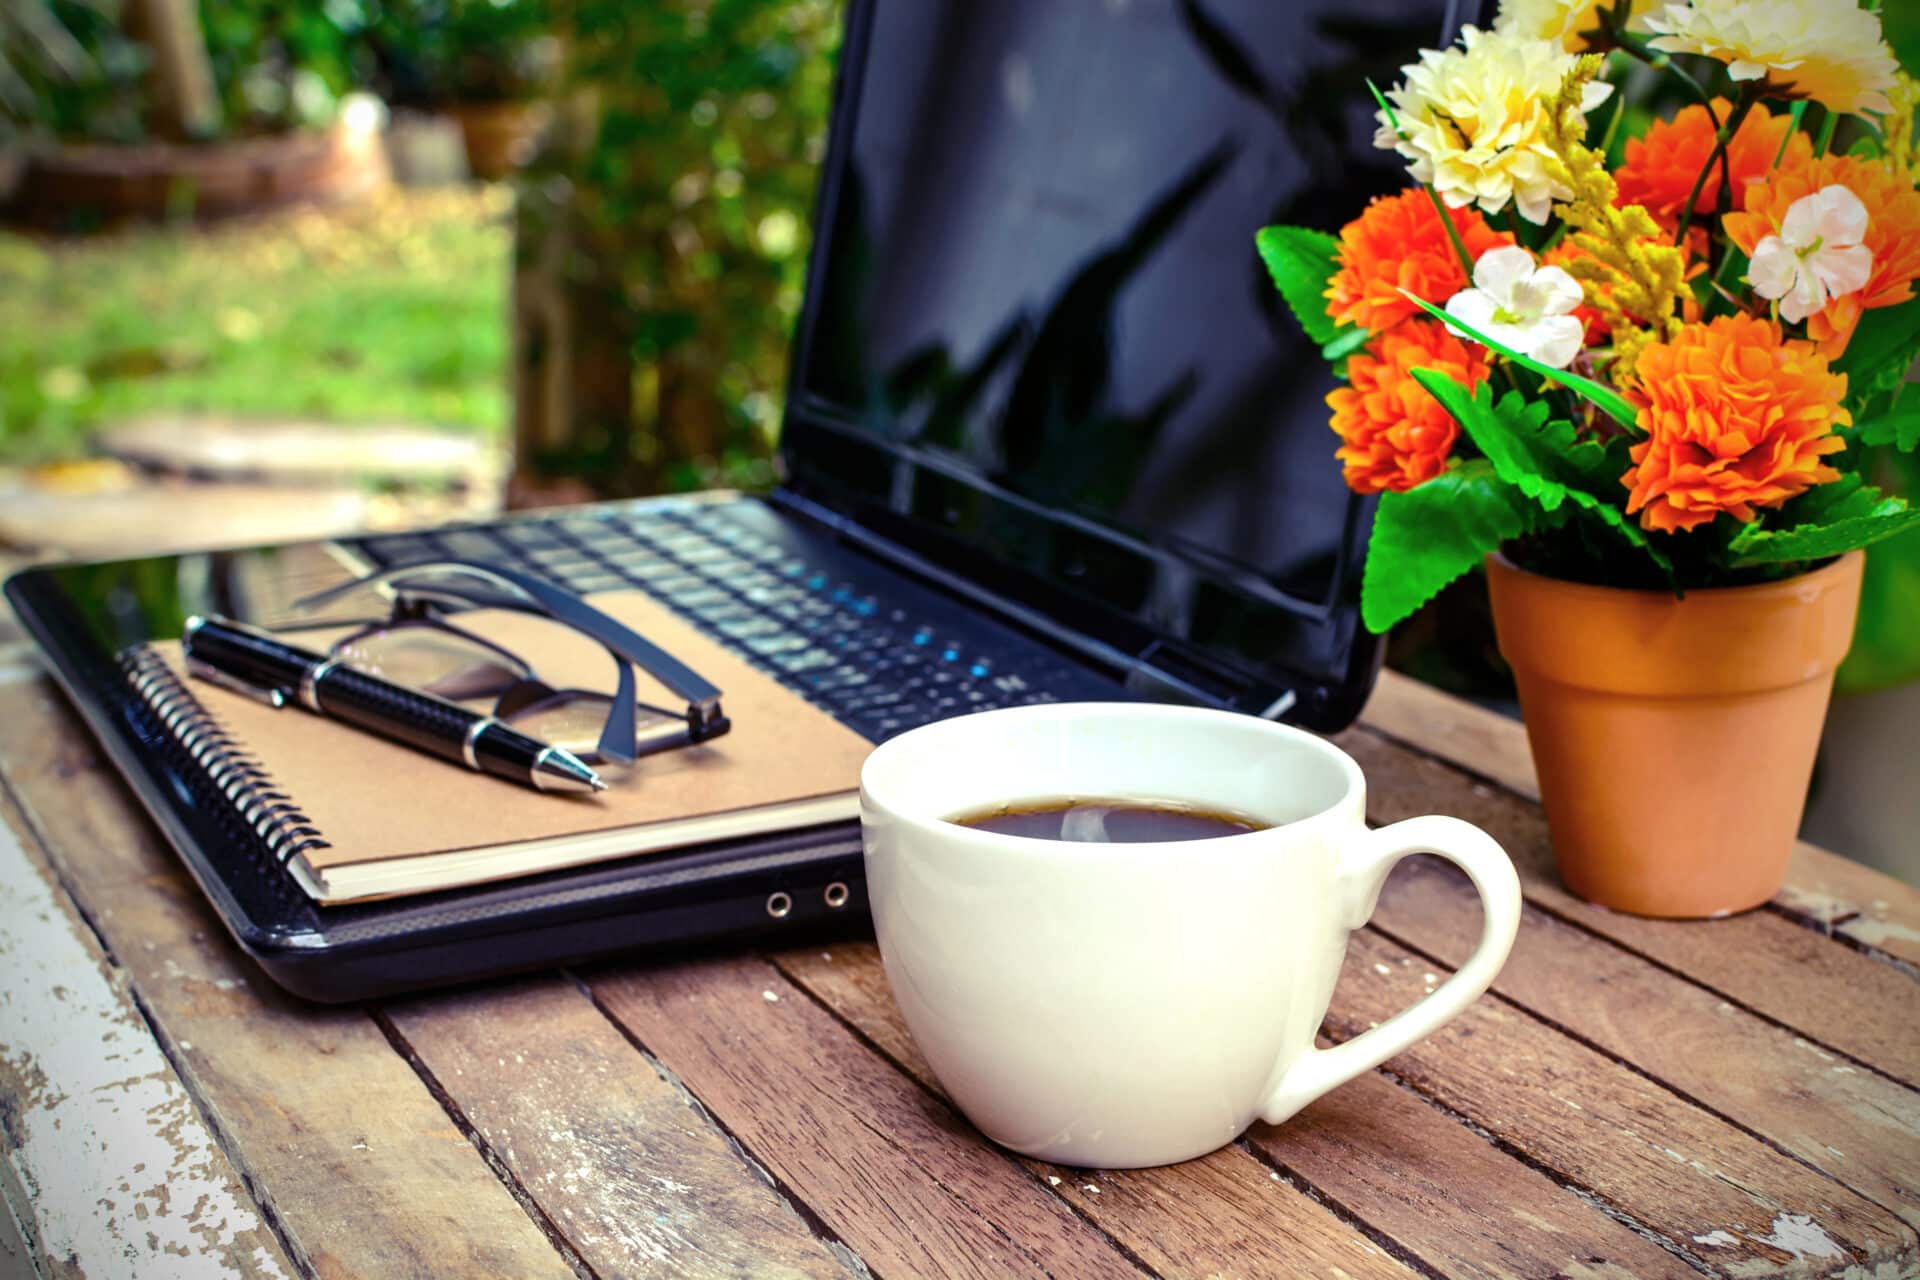 A laptop on a table with a cup of coffee and flowers